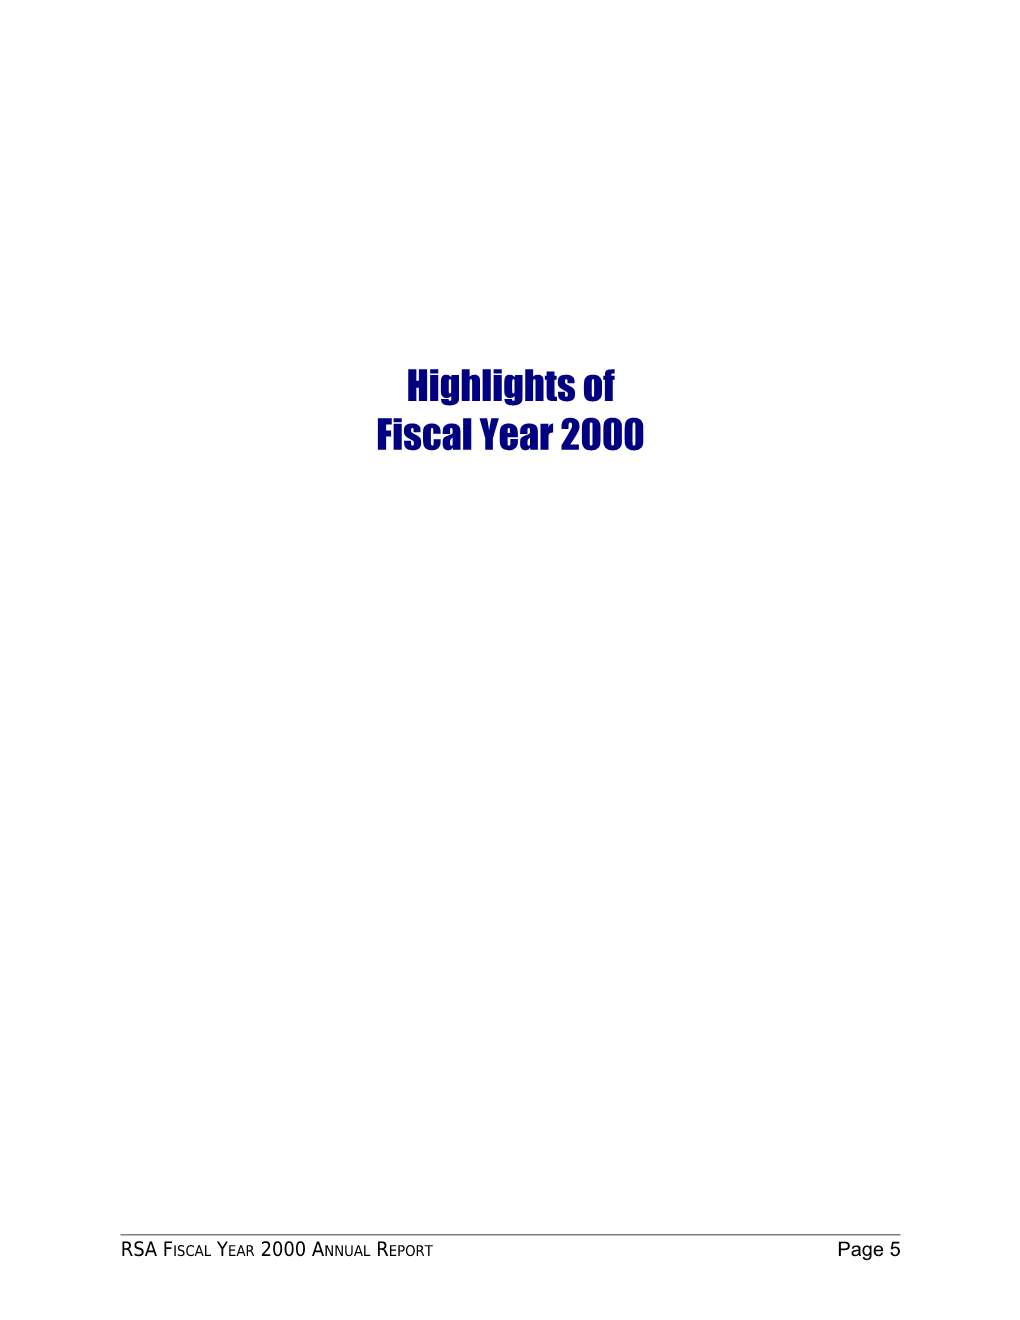 Rehabilitation Services Administration (RSA) Annual Report, Fiscal Year 2000: Highlights